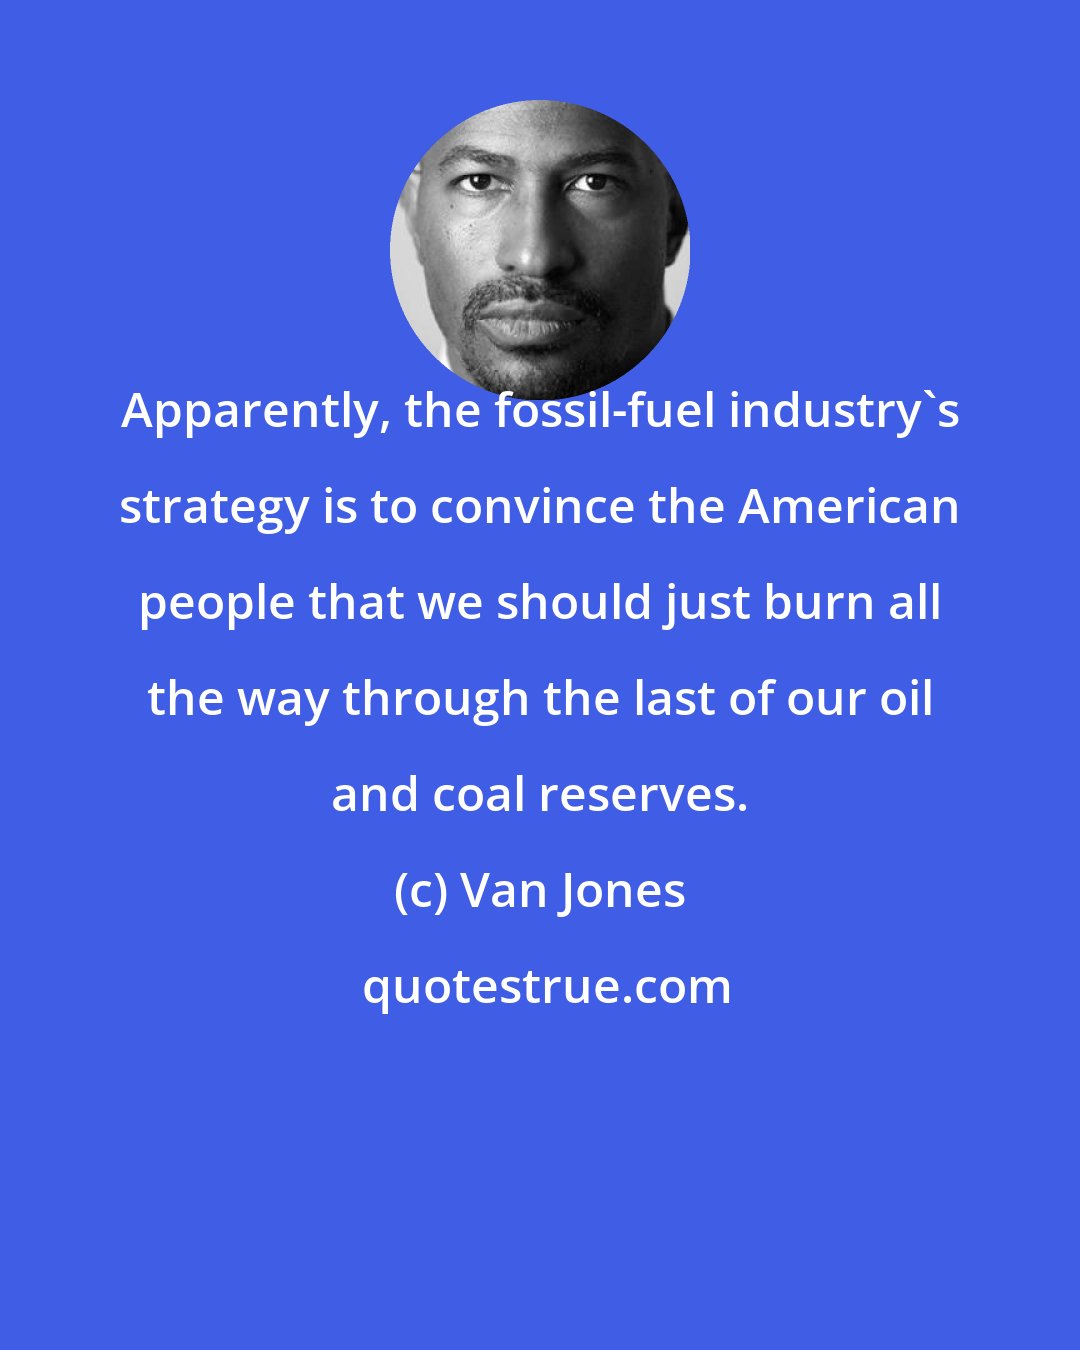 Van Jones: Apparently, the fossil-fuel industry's strategy is to convince the American people that we should just burn all the way through the last of our oil and coal reserves.